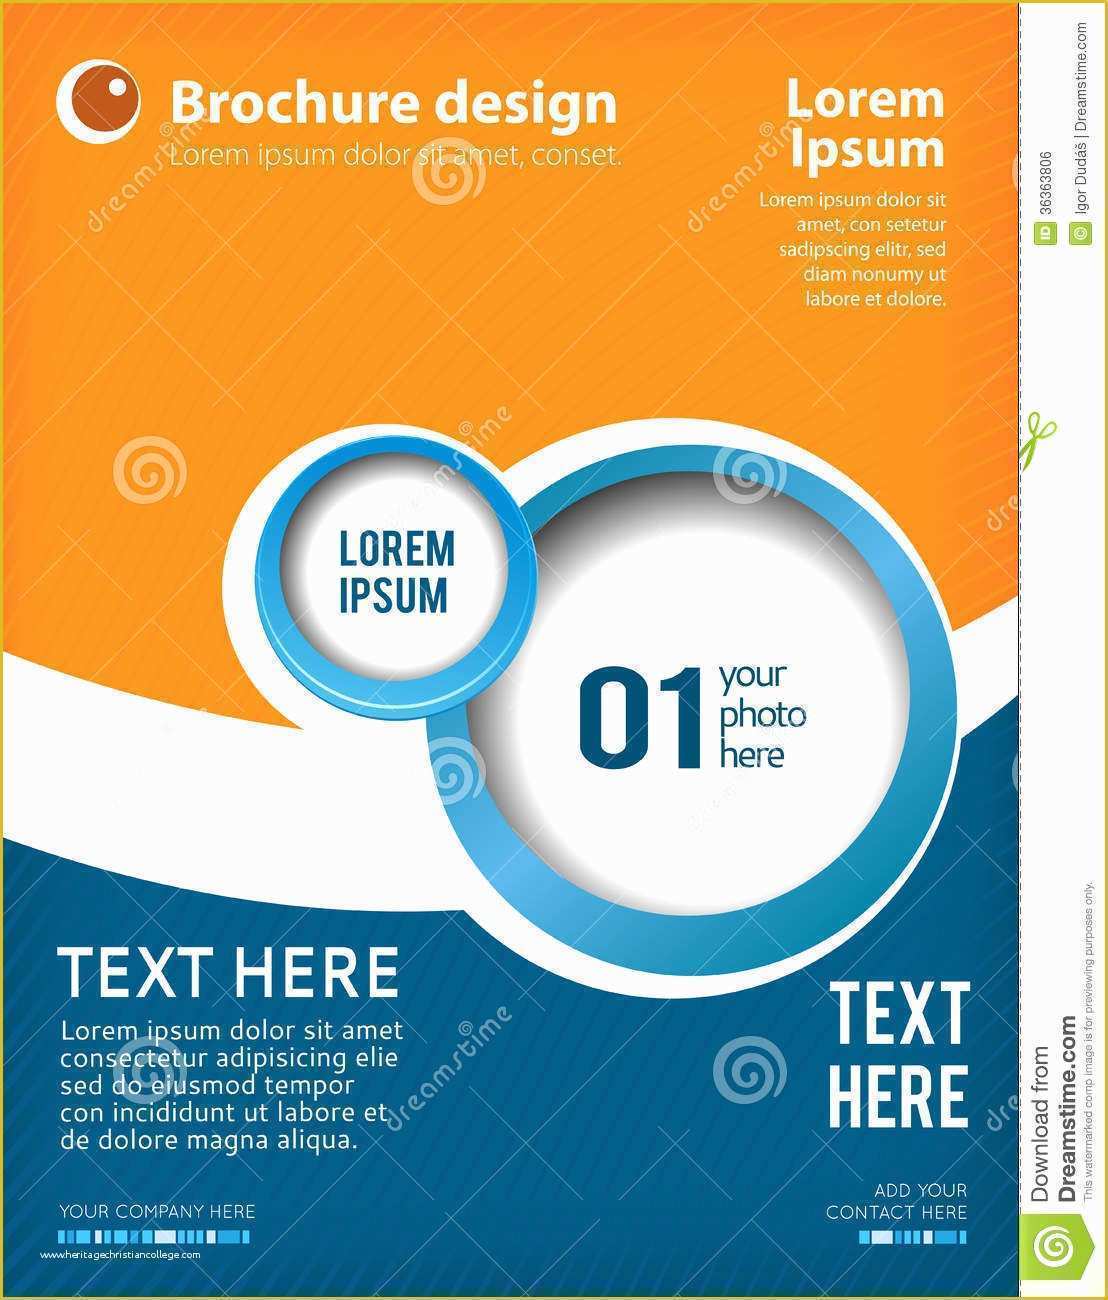 Free Poster Templates Of Design Layout Template Stock Illustration Illustration Of